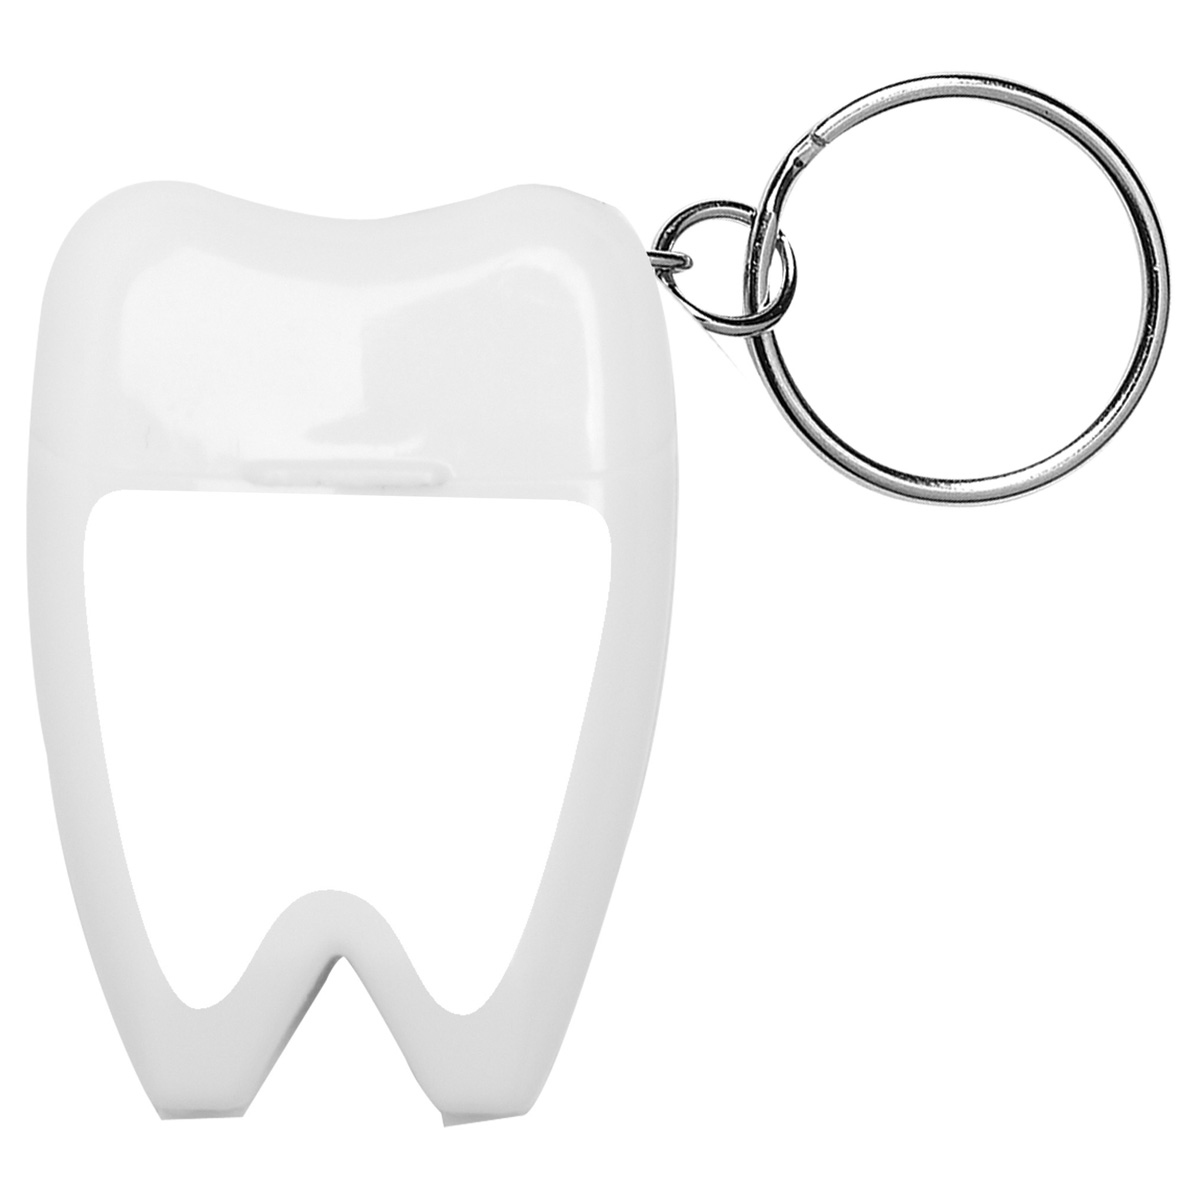 White Happy Teeth Tooth Shaped Dental Floss Dispenser with Keyring